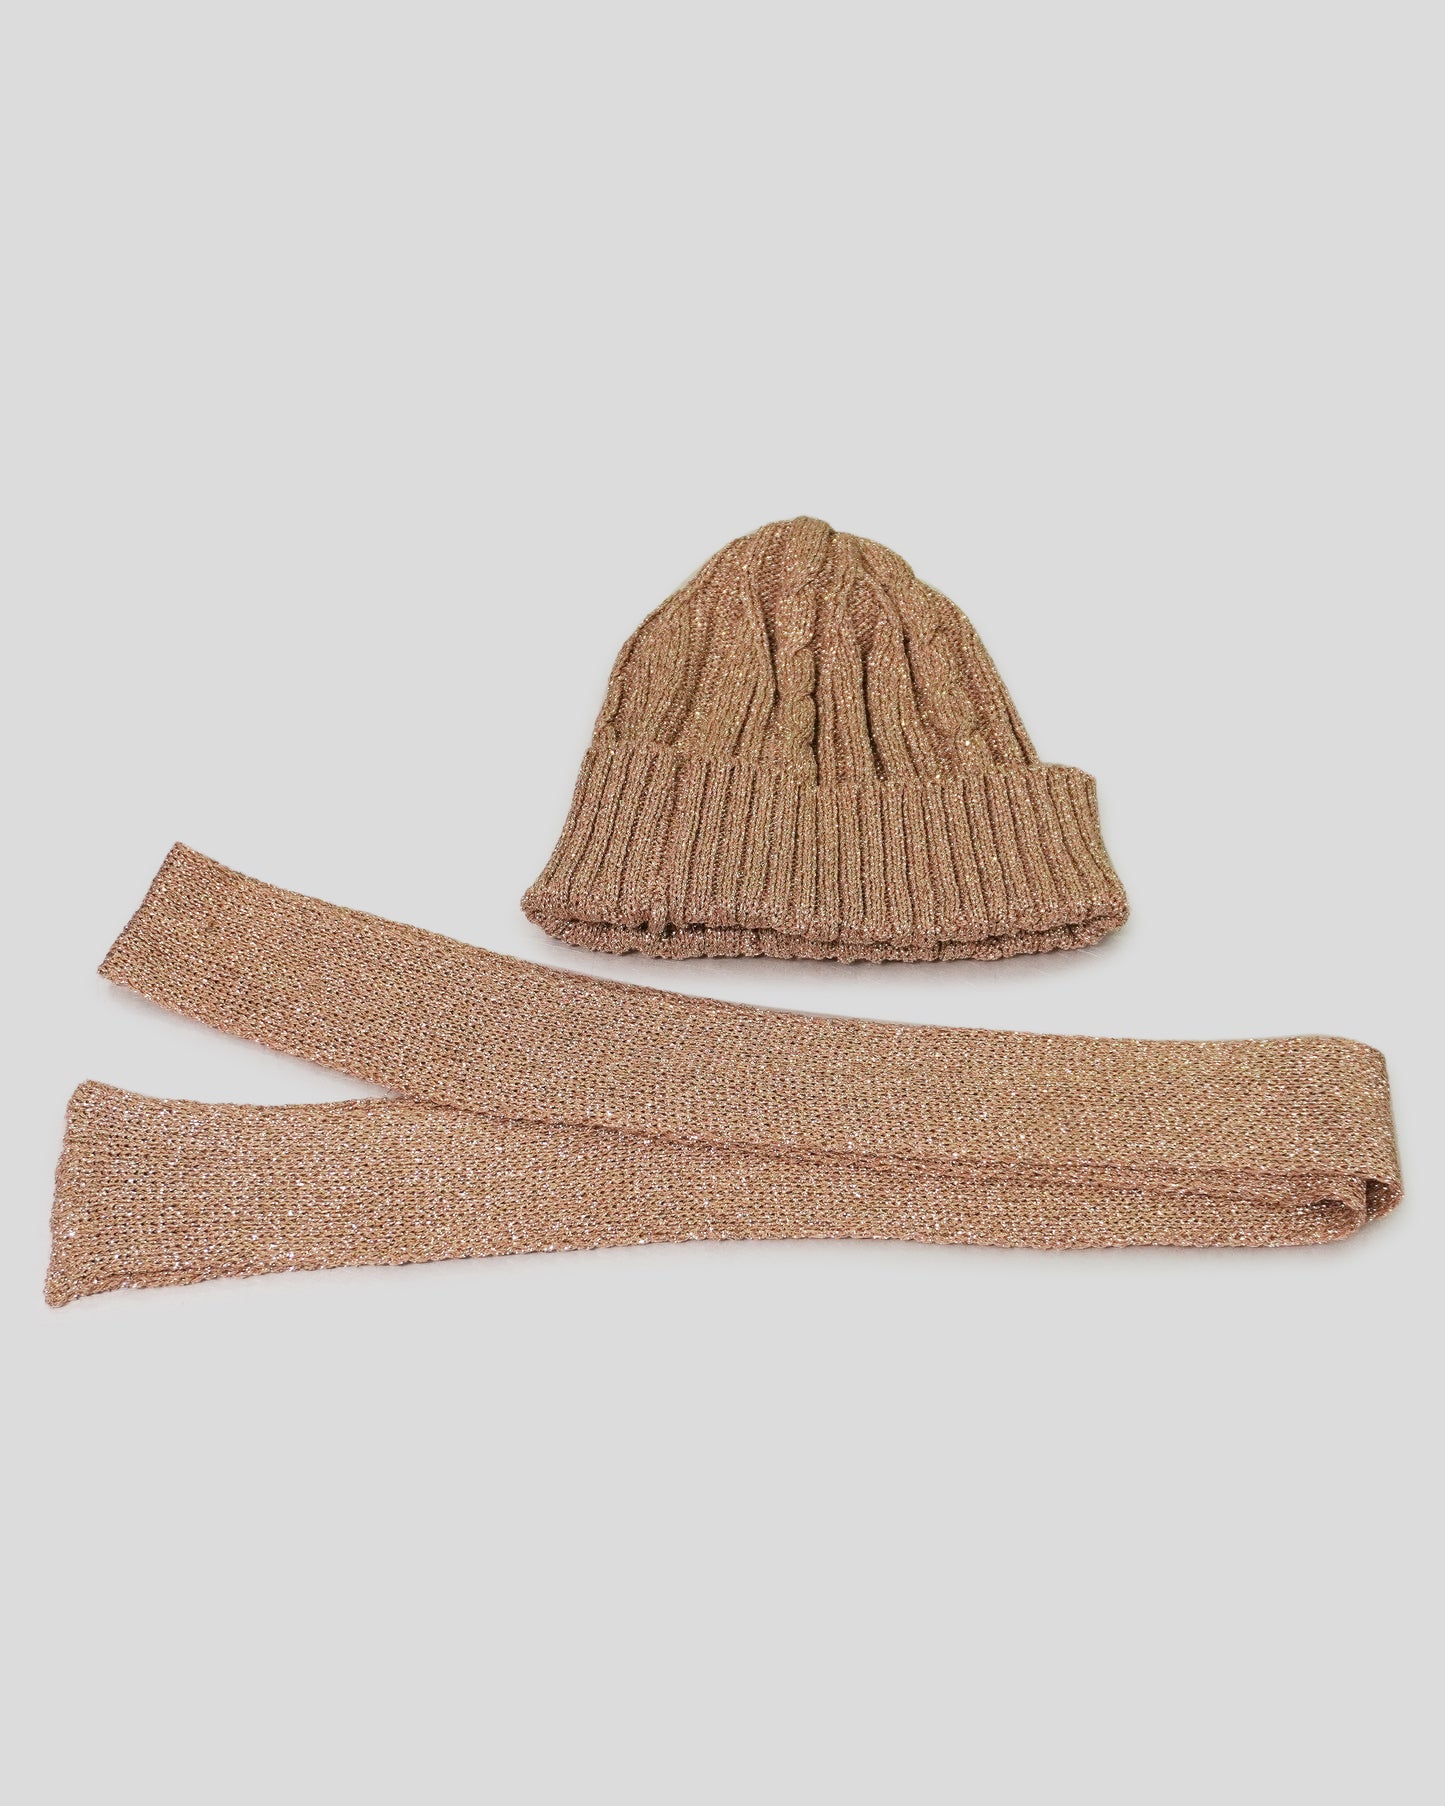 MERRMA - Gold Knit Beanie and Scarf